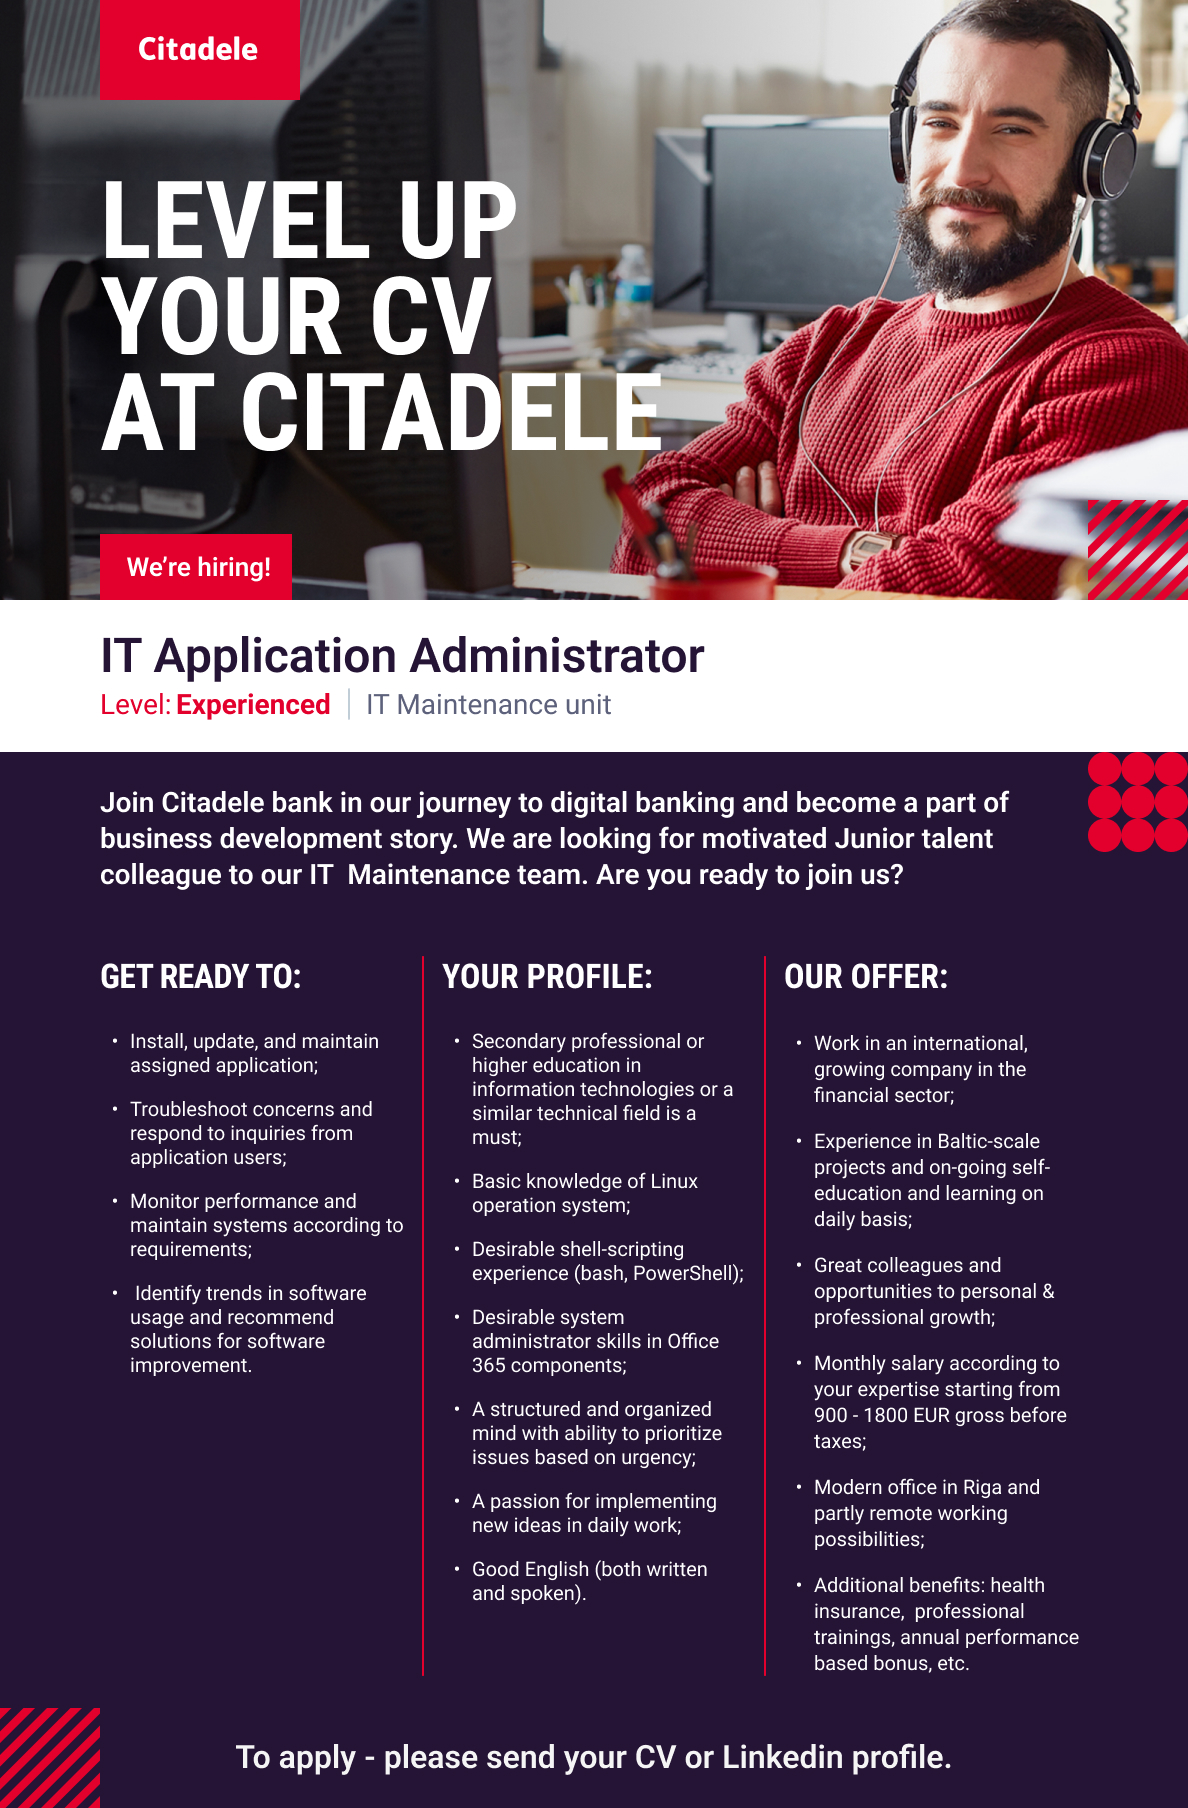 IT Application Administrator